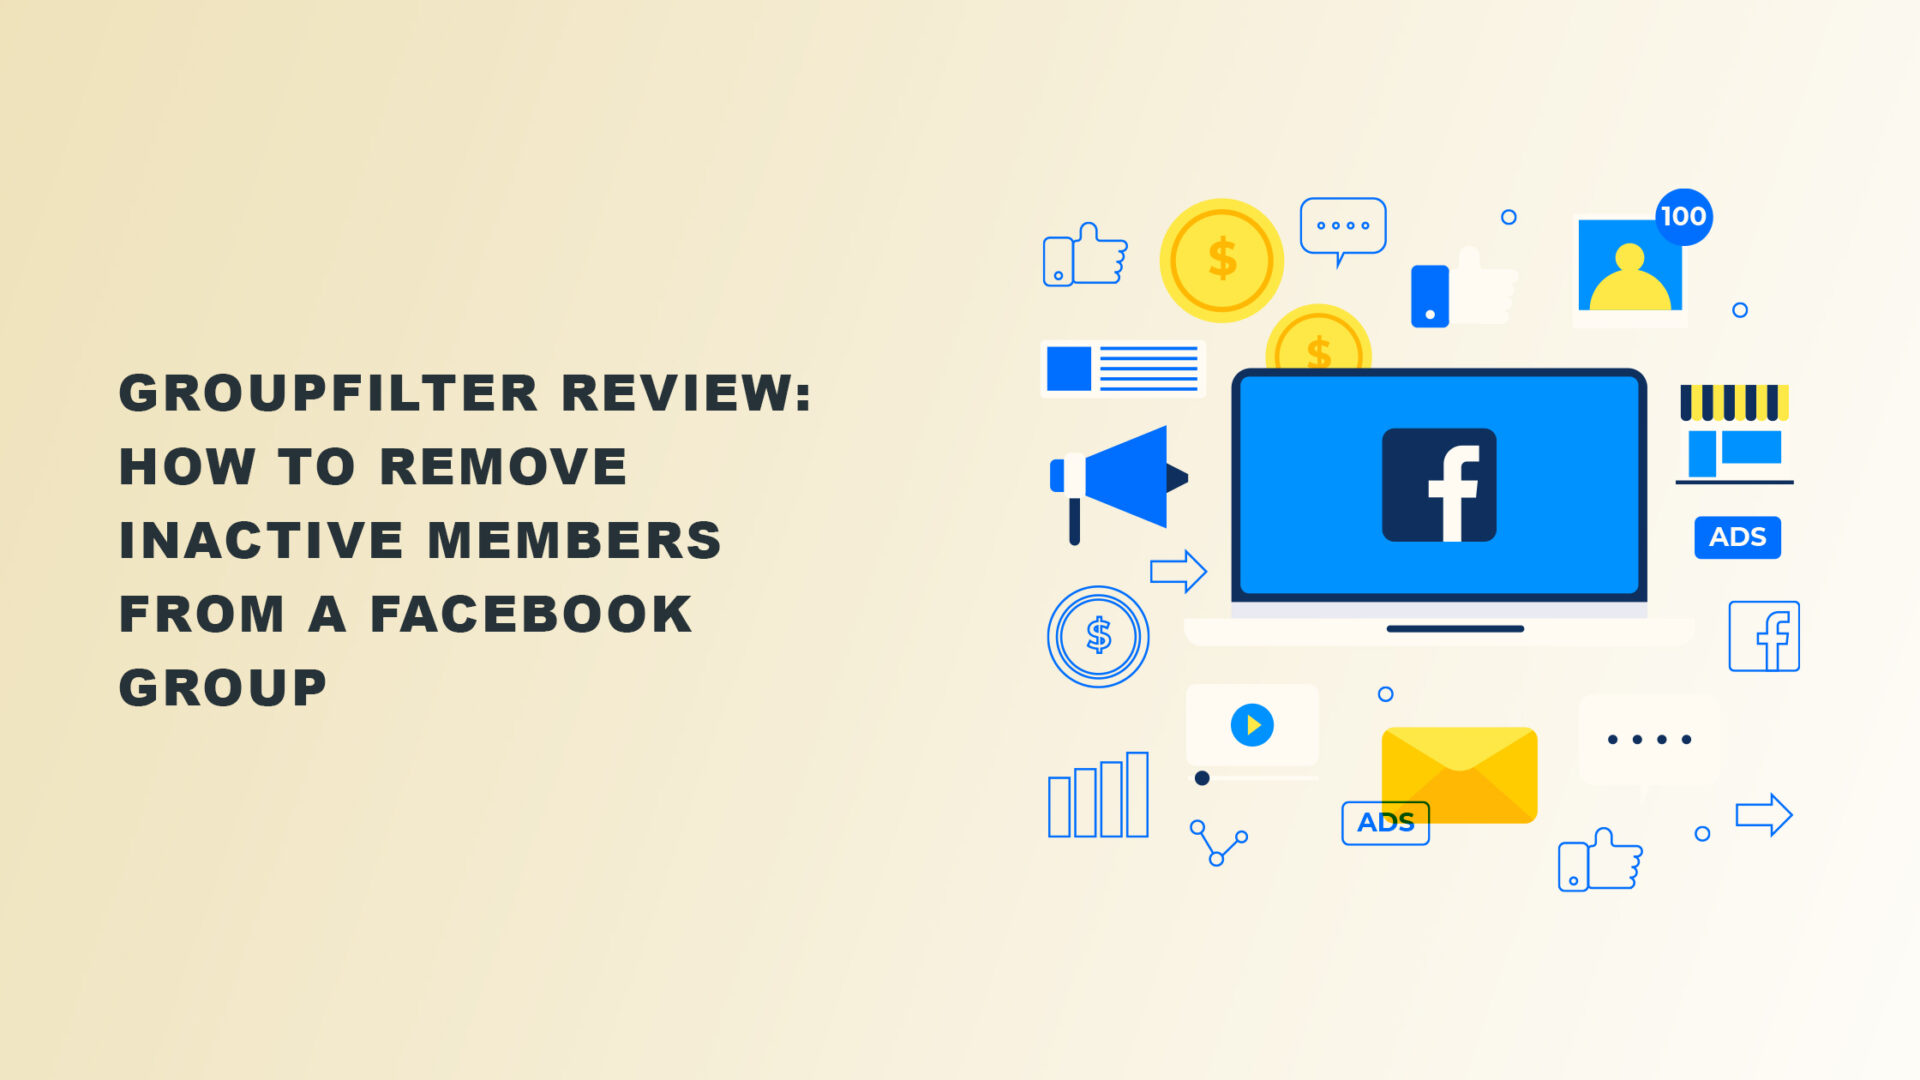 GroupFilter Review - How To Remove Inactive Members From A Facebook Group